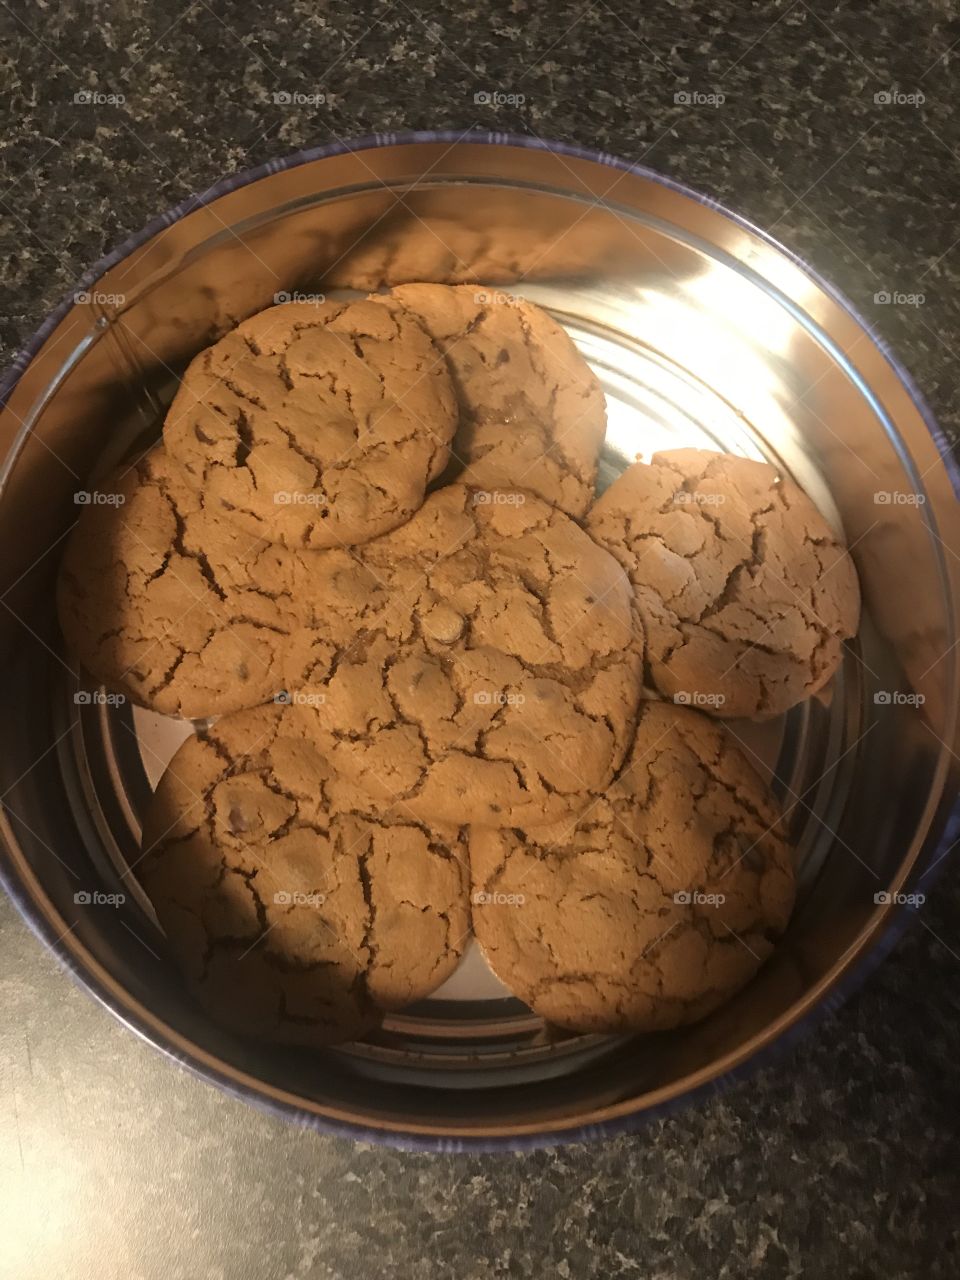 Delicious looking peanut butter chocolate chip cookies, half a dozen homemade cookies 